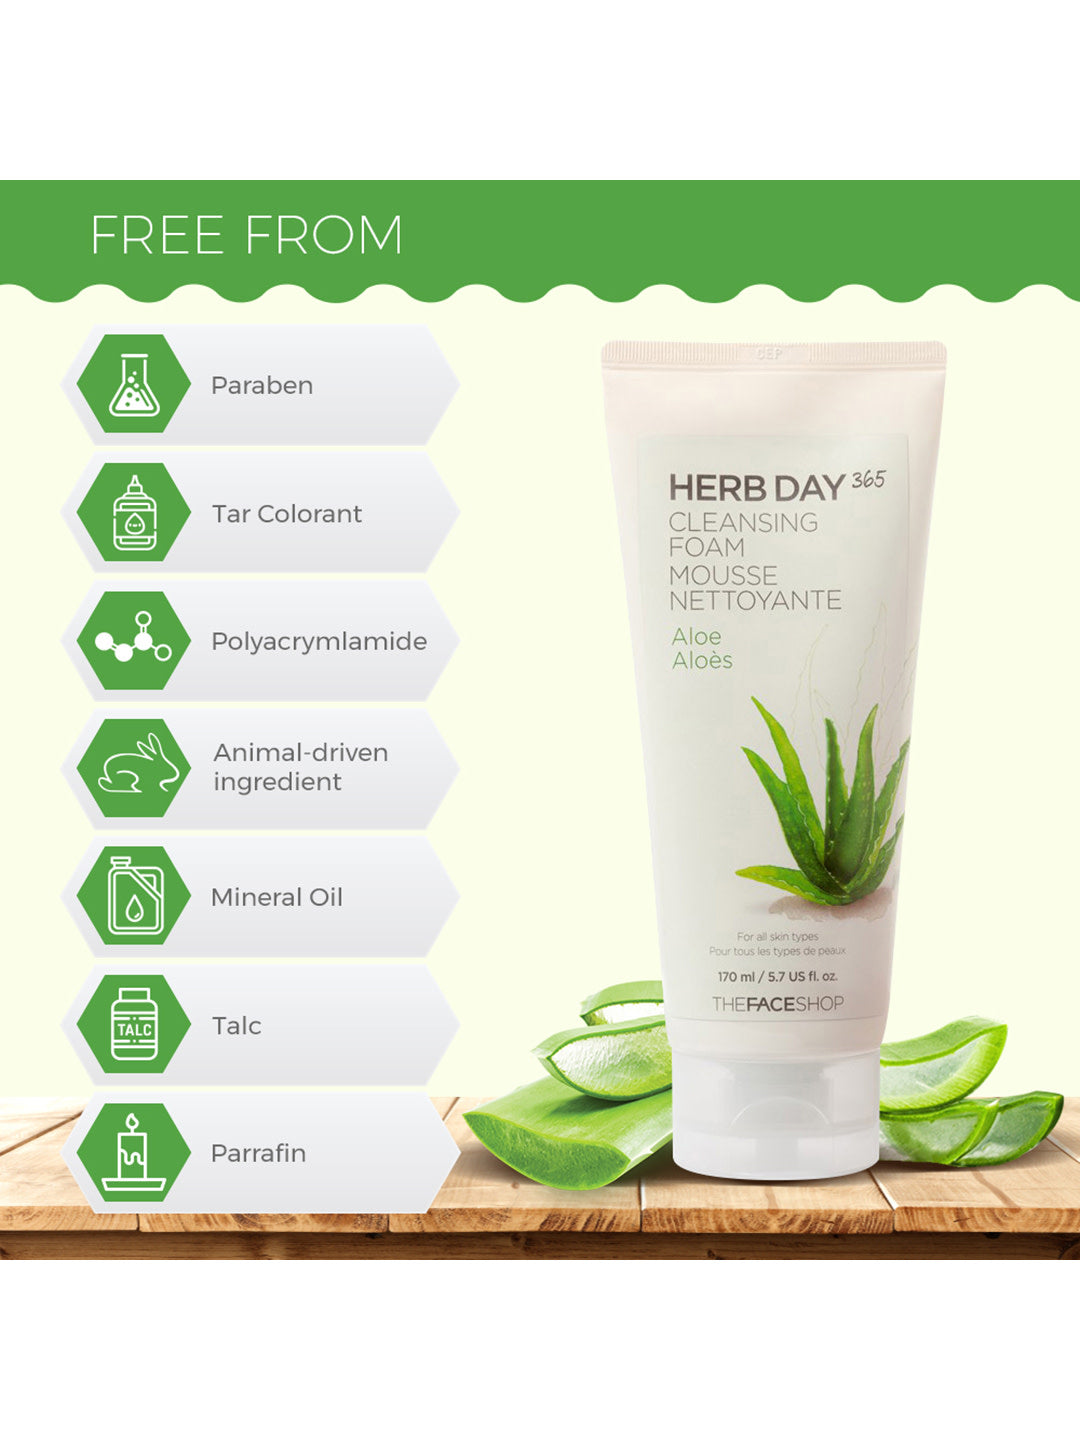 THE FACESHOP Herb Day 365 Cleansing Foam Aloe - Misumi Cosmetics Nepal